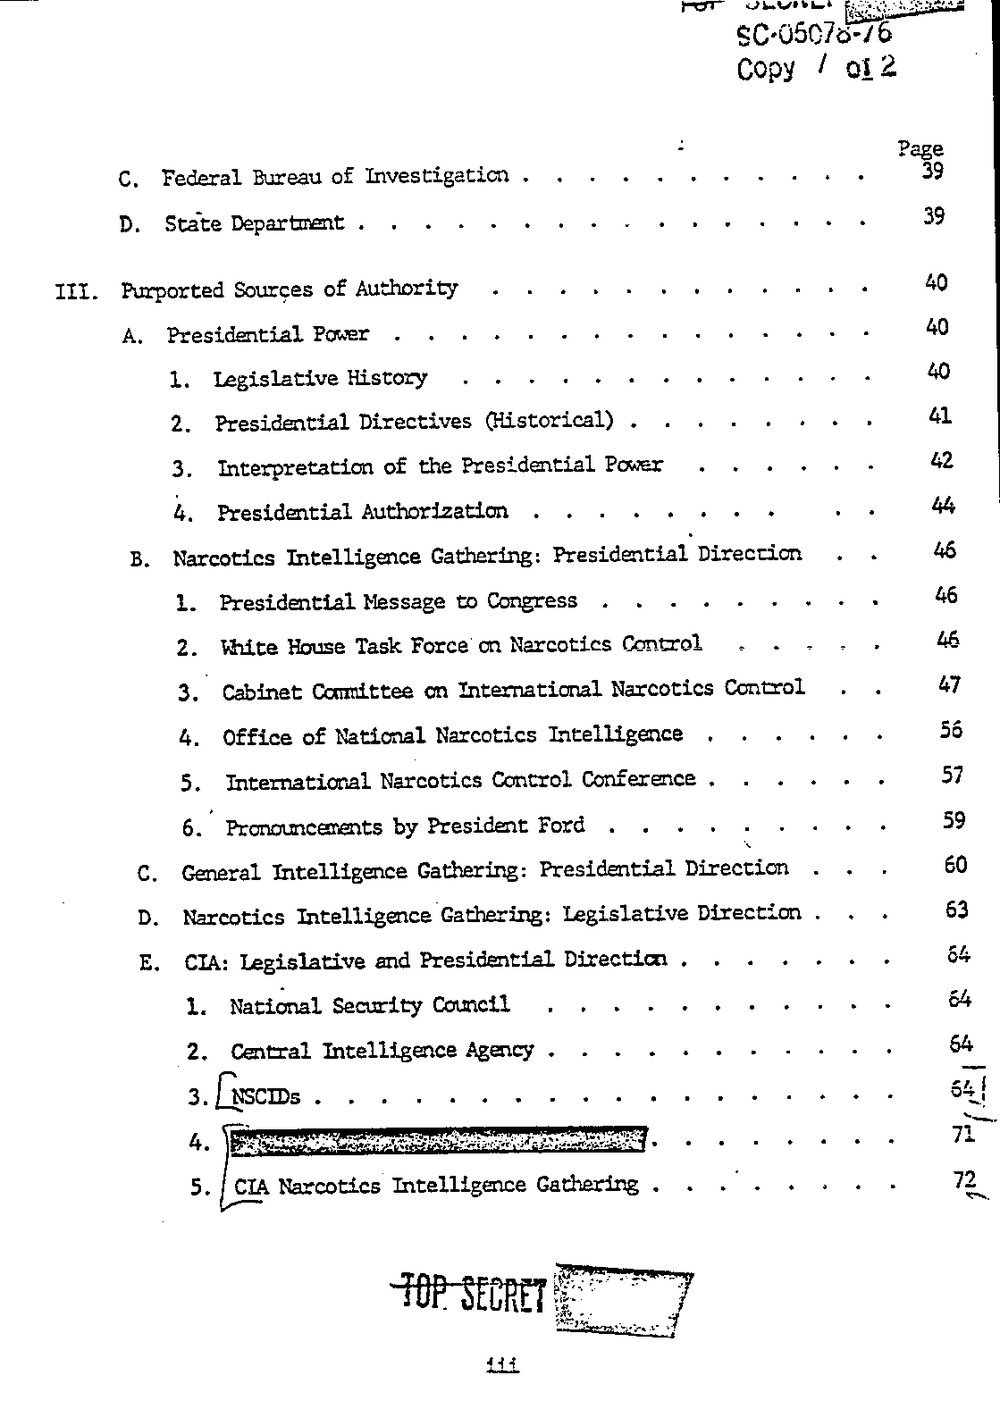 Page 4 from Report on Inquiry Into CIA Related Electronic Surveillance Activities